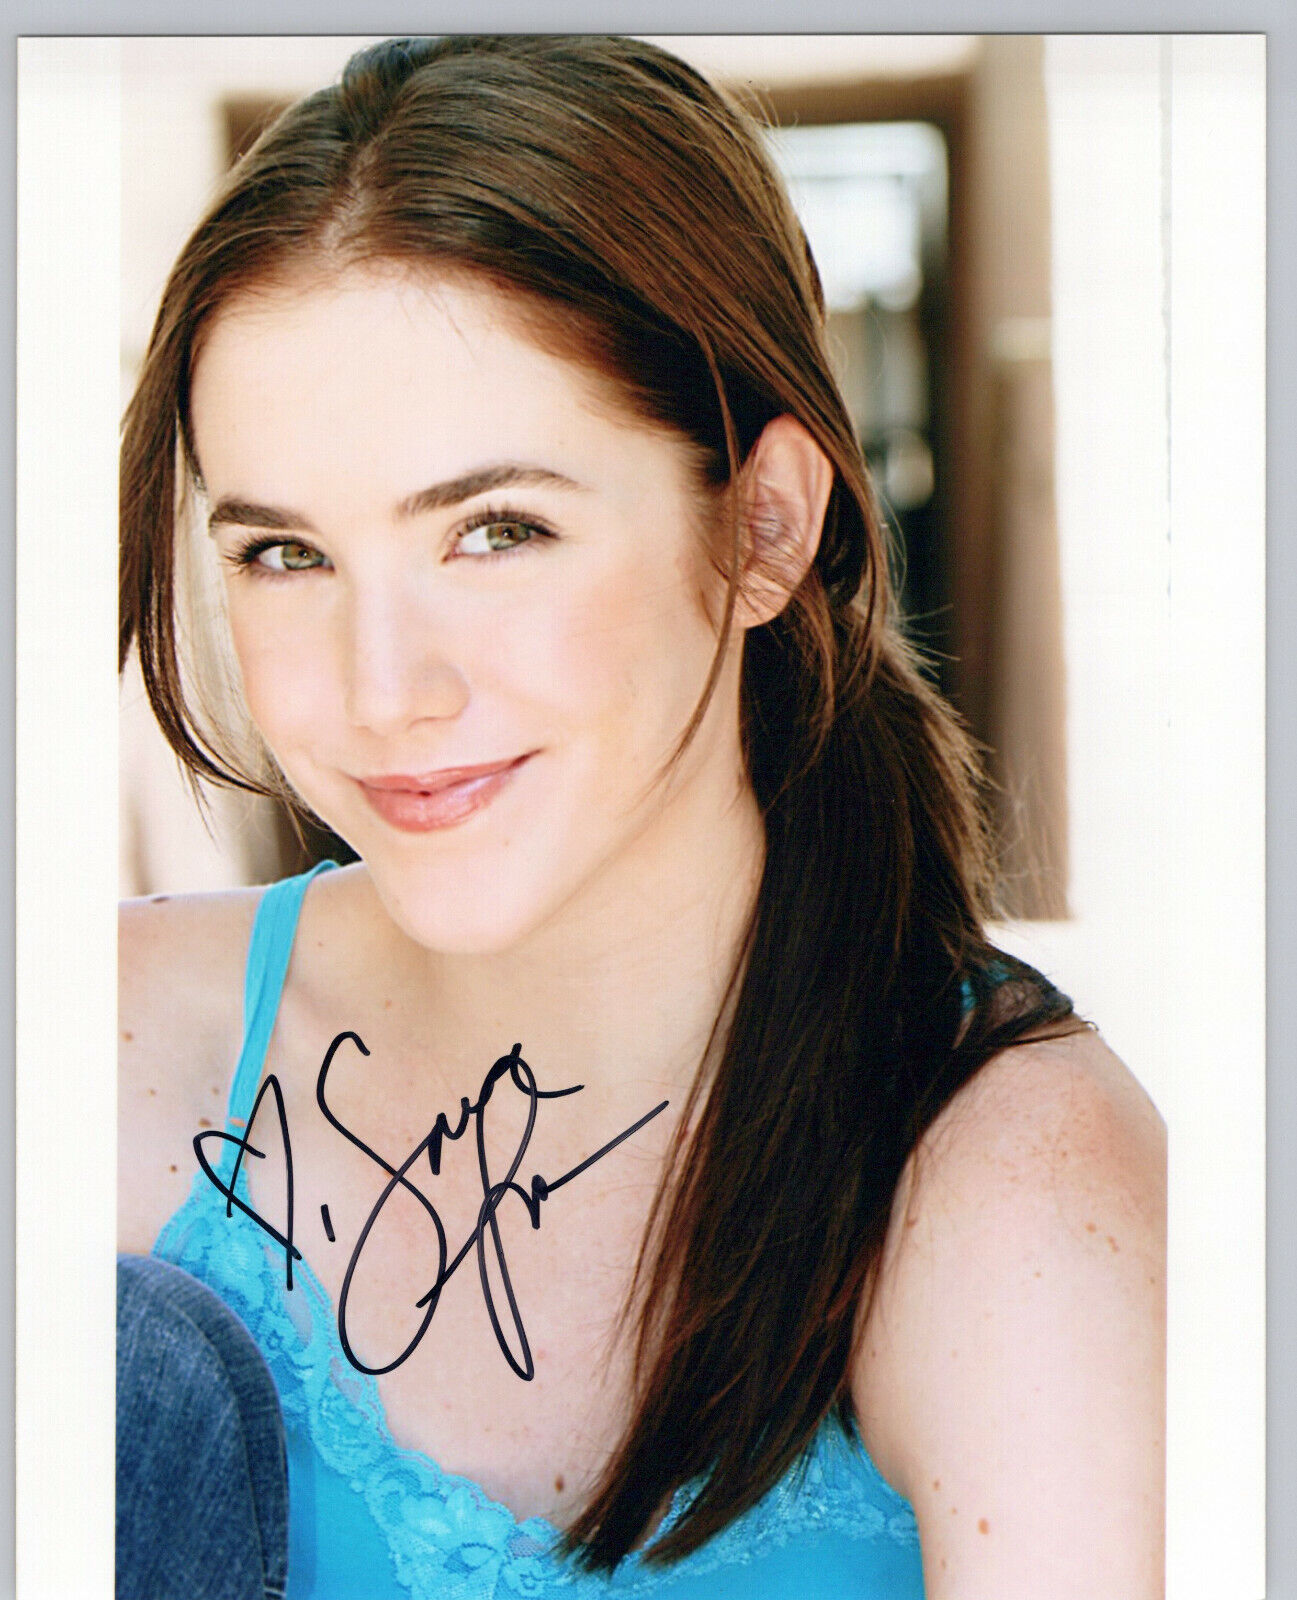 Spencer Locke glamour shot autographed Photo Poster painting signed 8x10 #2